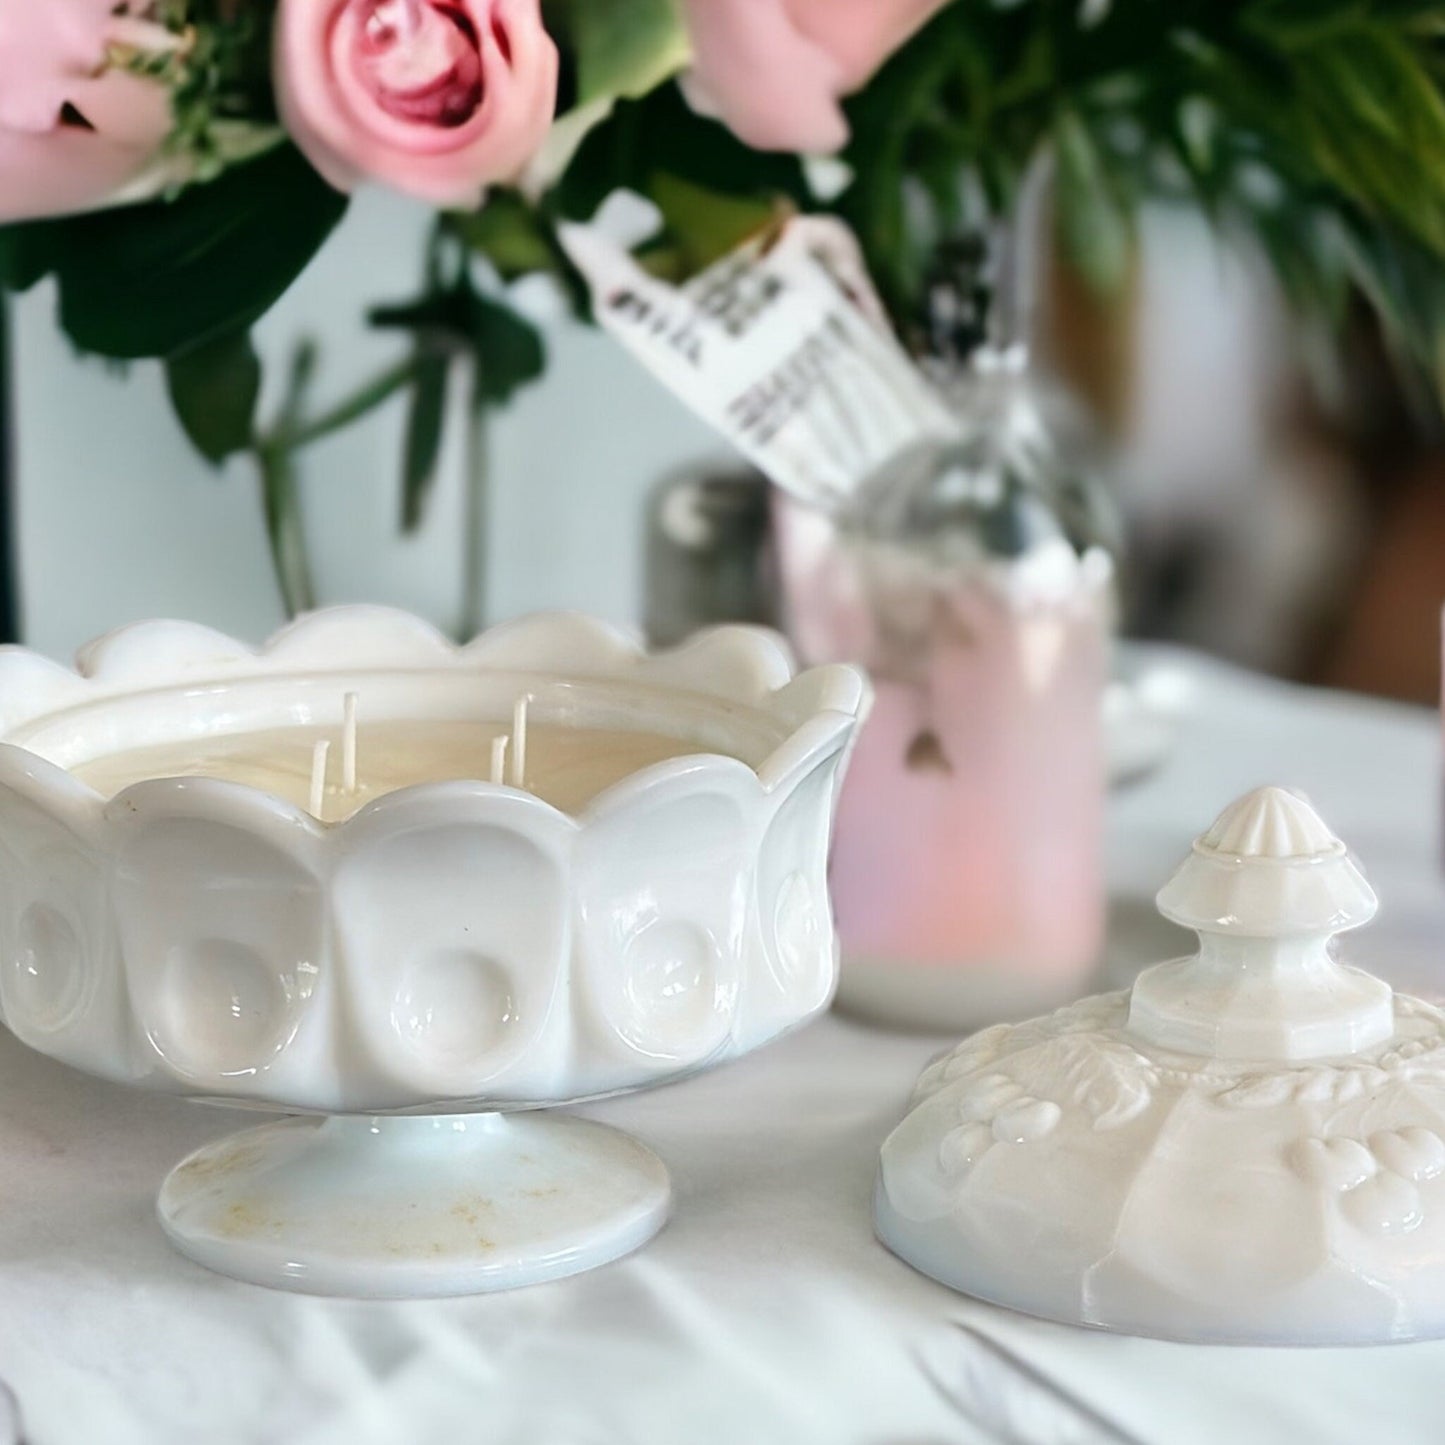 Soy Candle, Milk Glass, Candy Dish, Best Friend Gifts, Wedding Gift